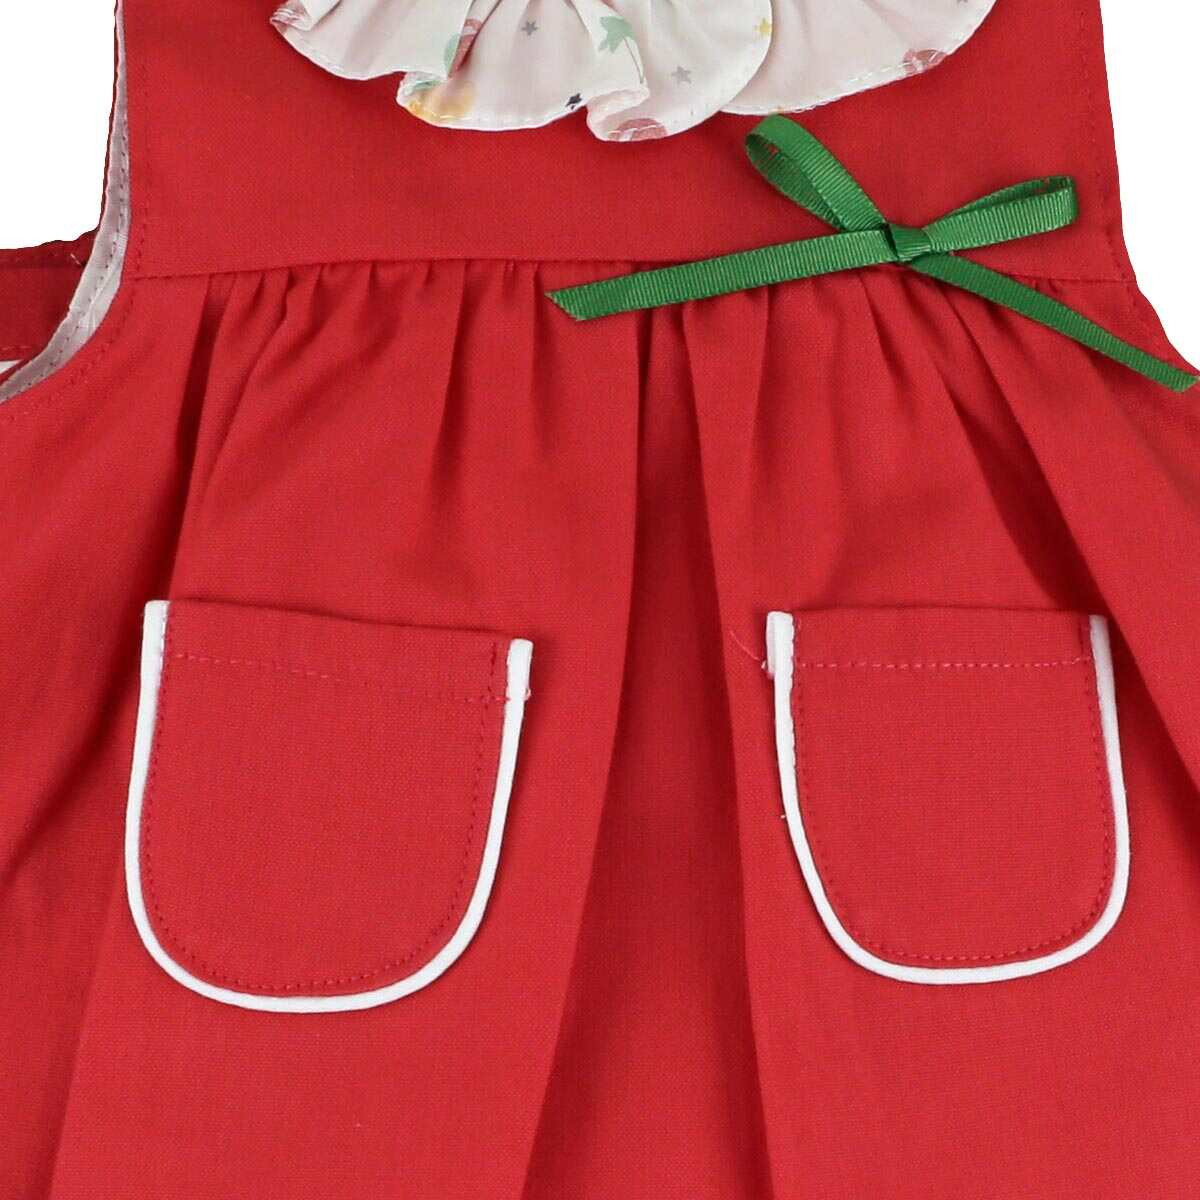 RED DRESS WITHBLOOMER AND BONNET BABYFERR - 2